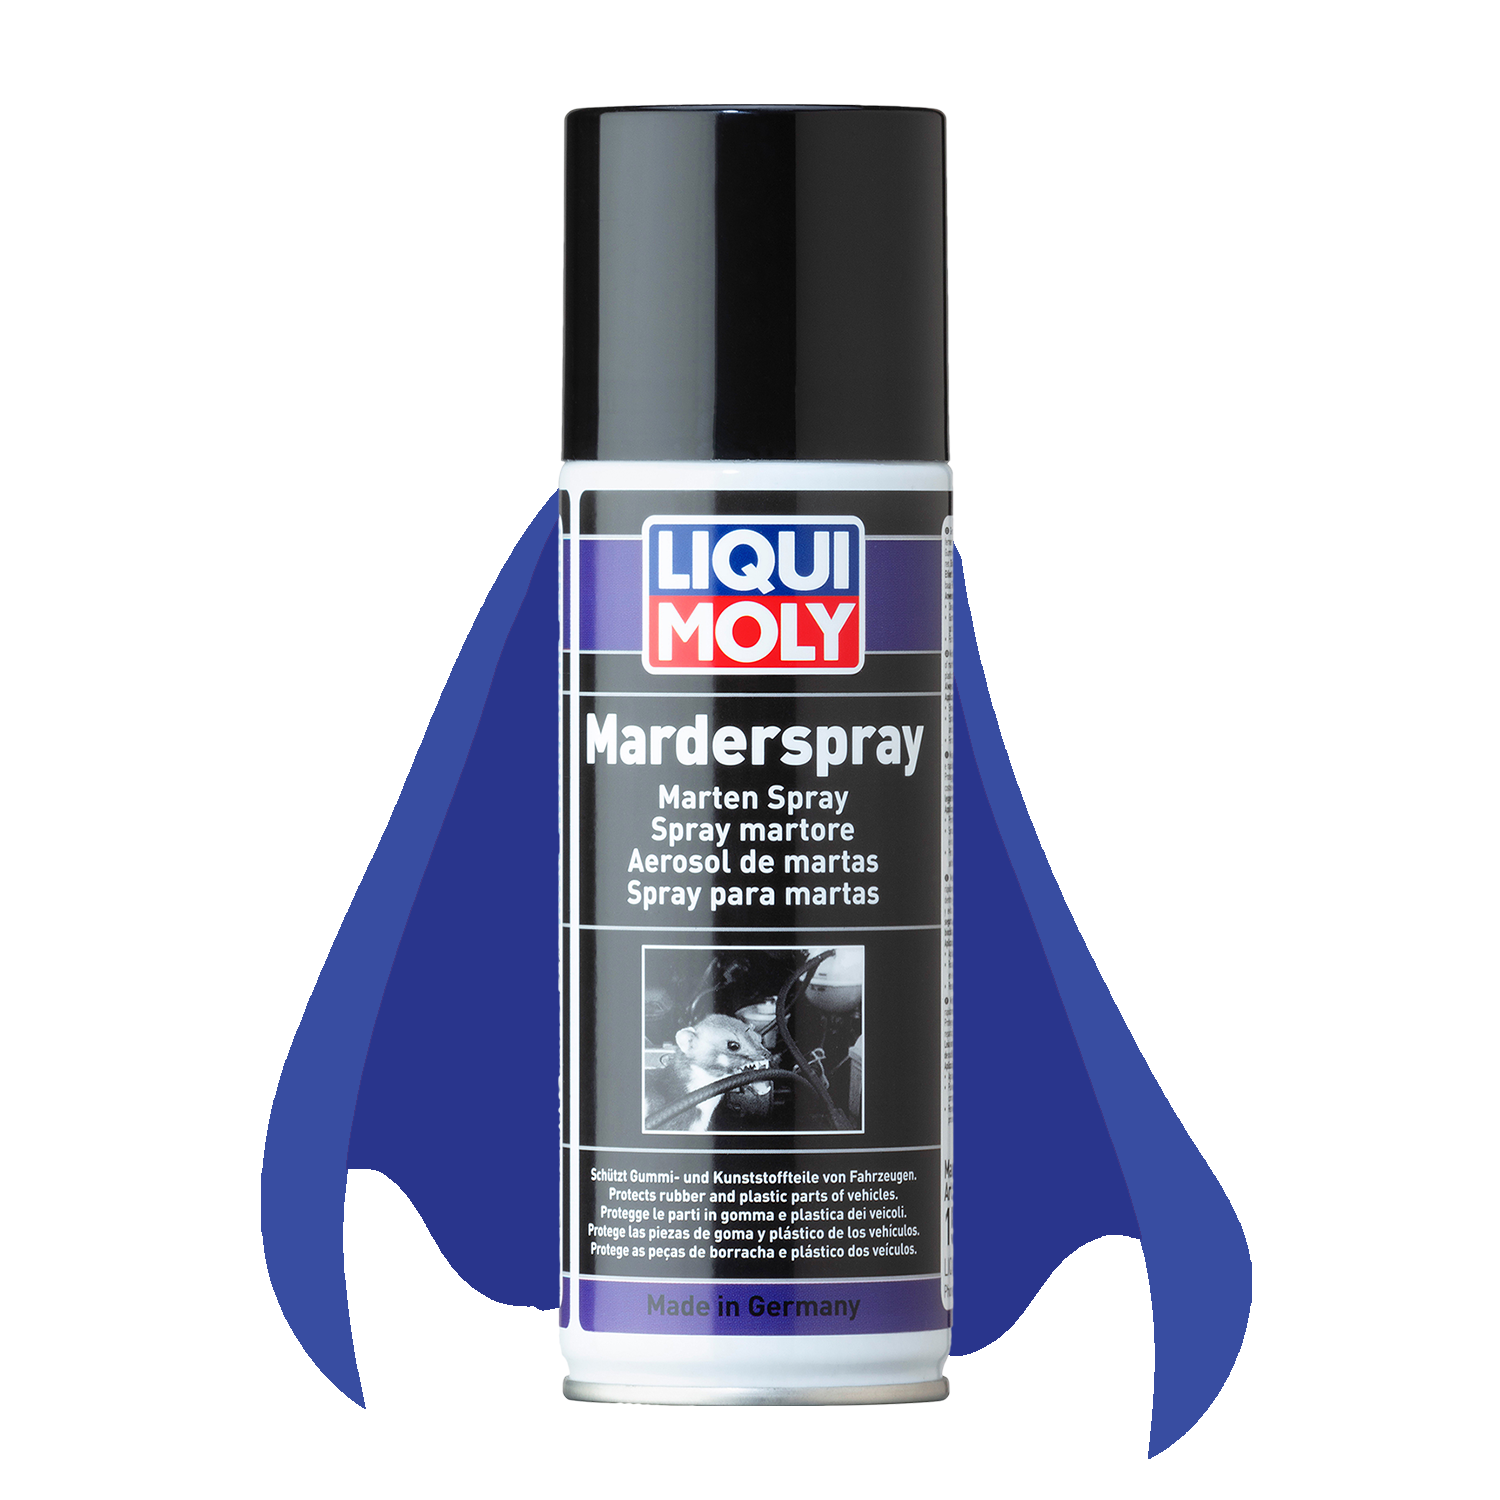 Liqui Moly multi-purpose cleaning product Marder Spray